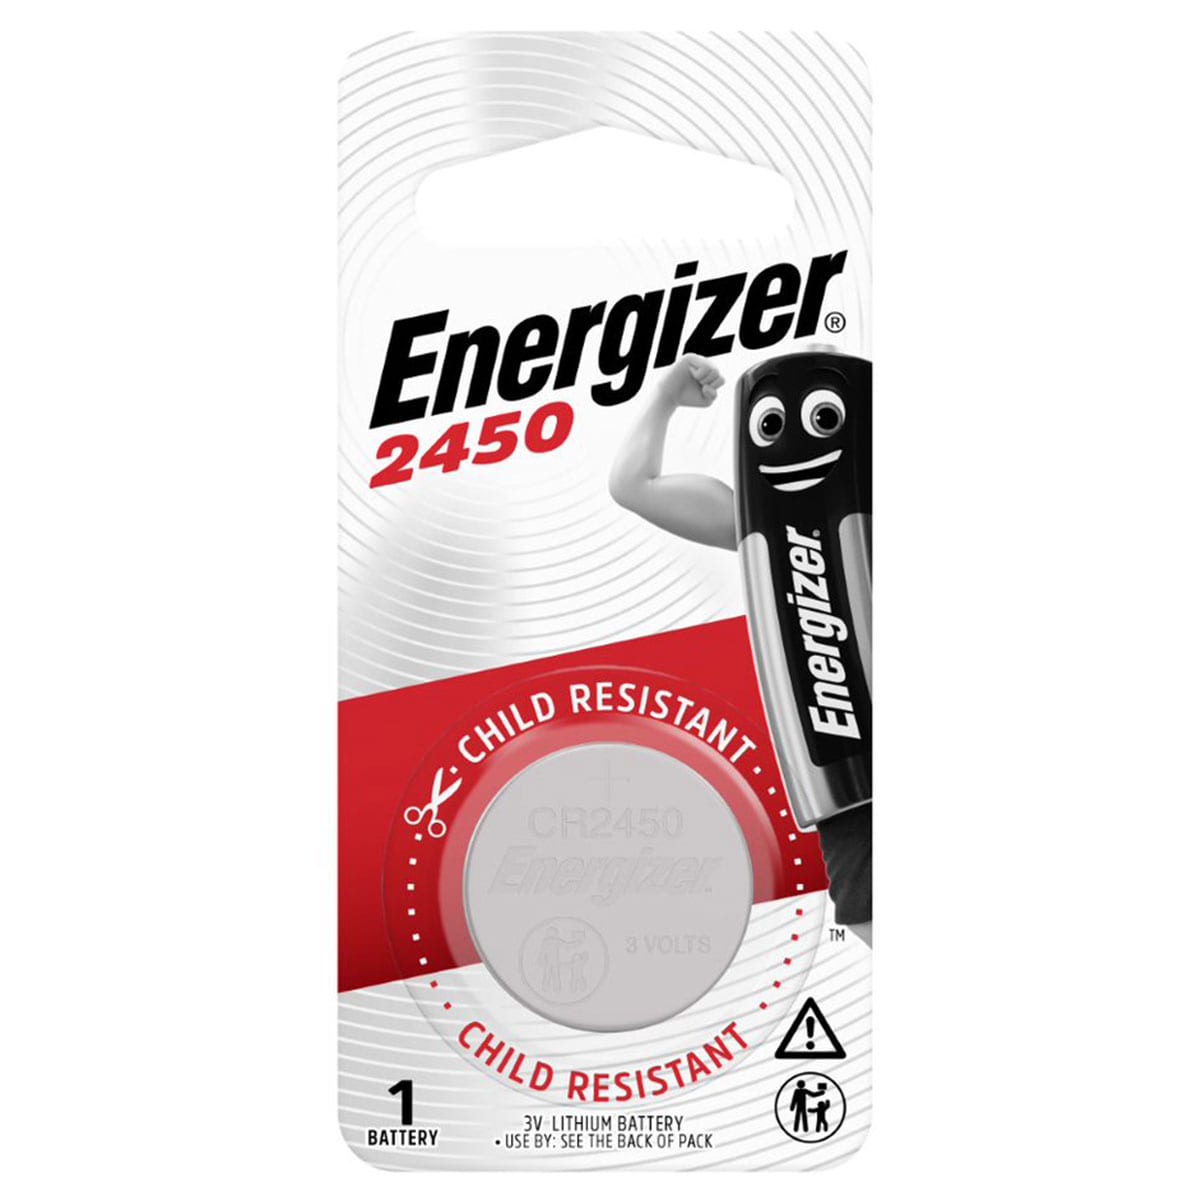 Energizer Lithium Battery CR2450 1 Pack